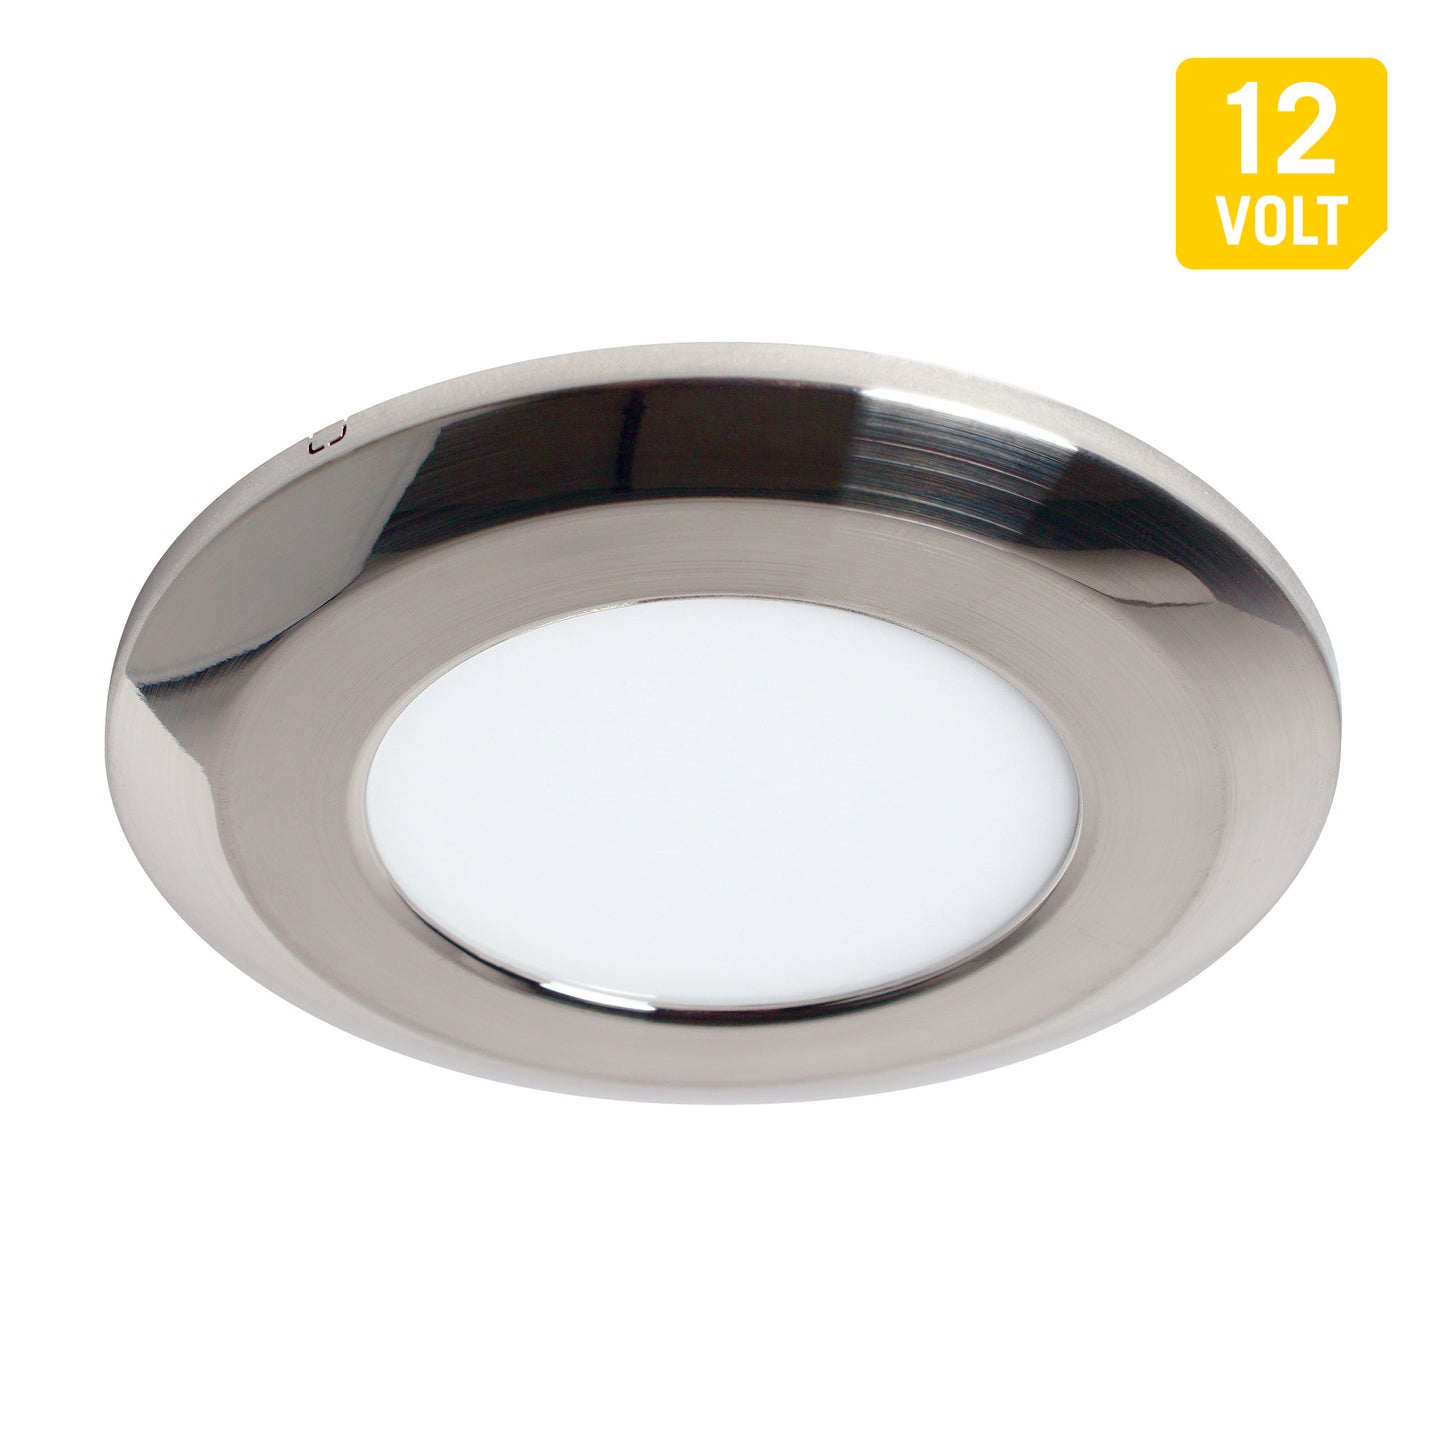 Dimmable Under Cabinet Light, Set of 4 Puck Lights, 8W 680LM